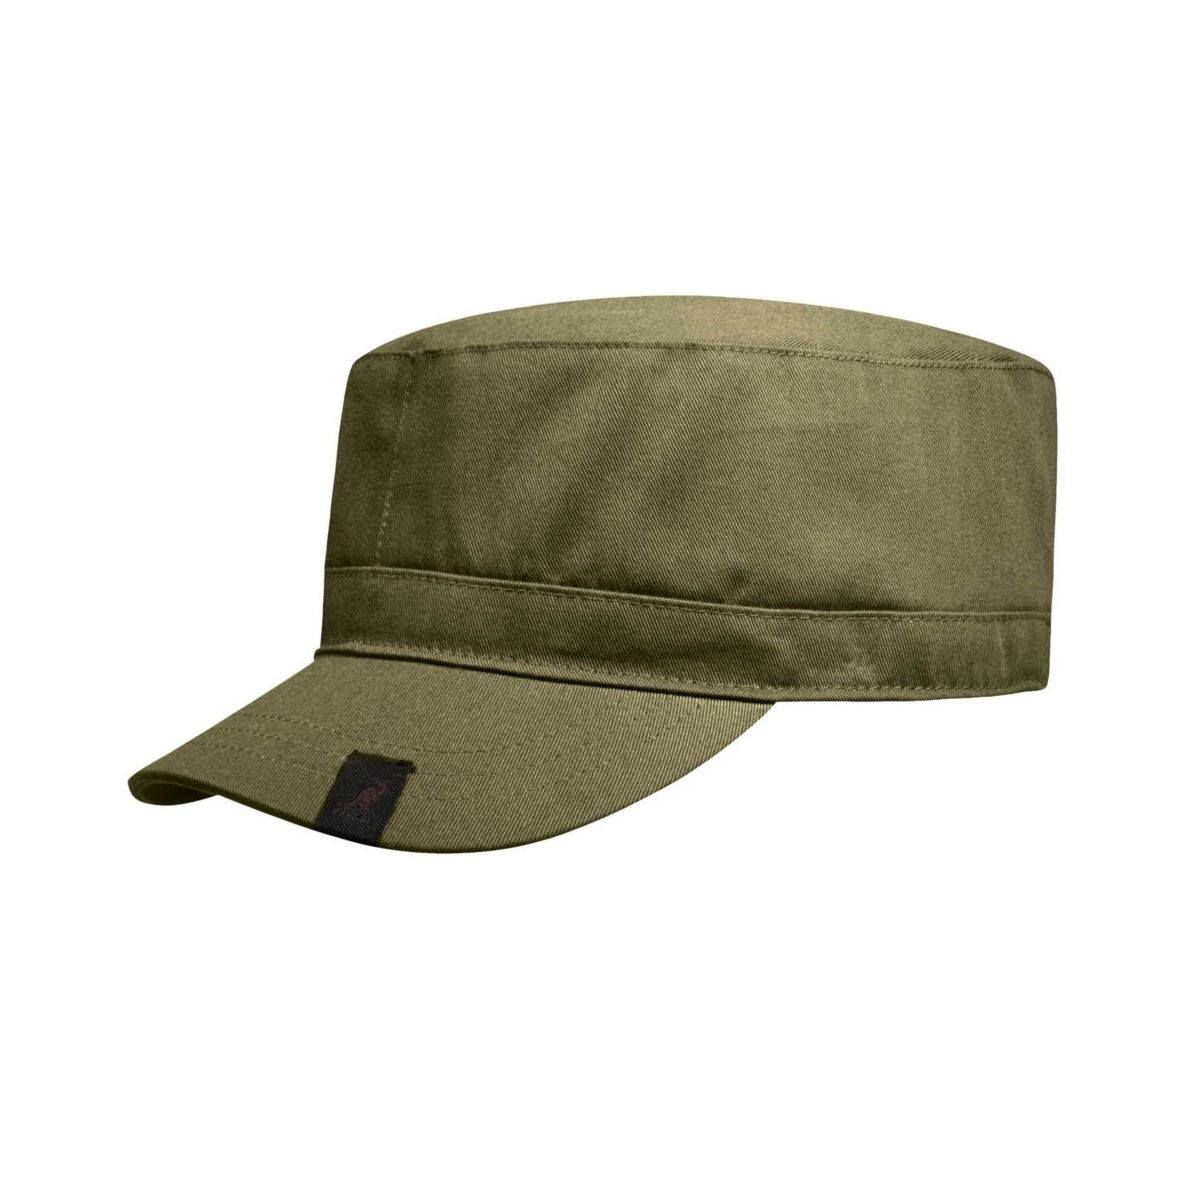 Unchanged make up admire Army Cap Cotton Kaki- Kangol Reference : 8558 | Chapellerie Traclet